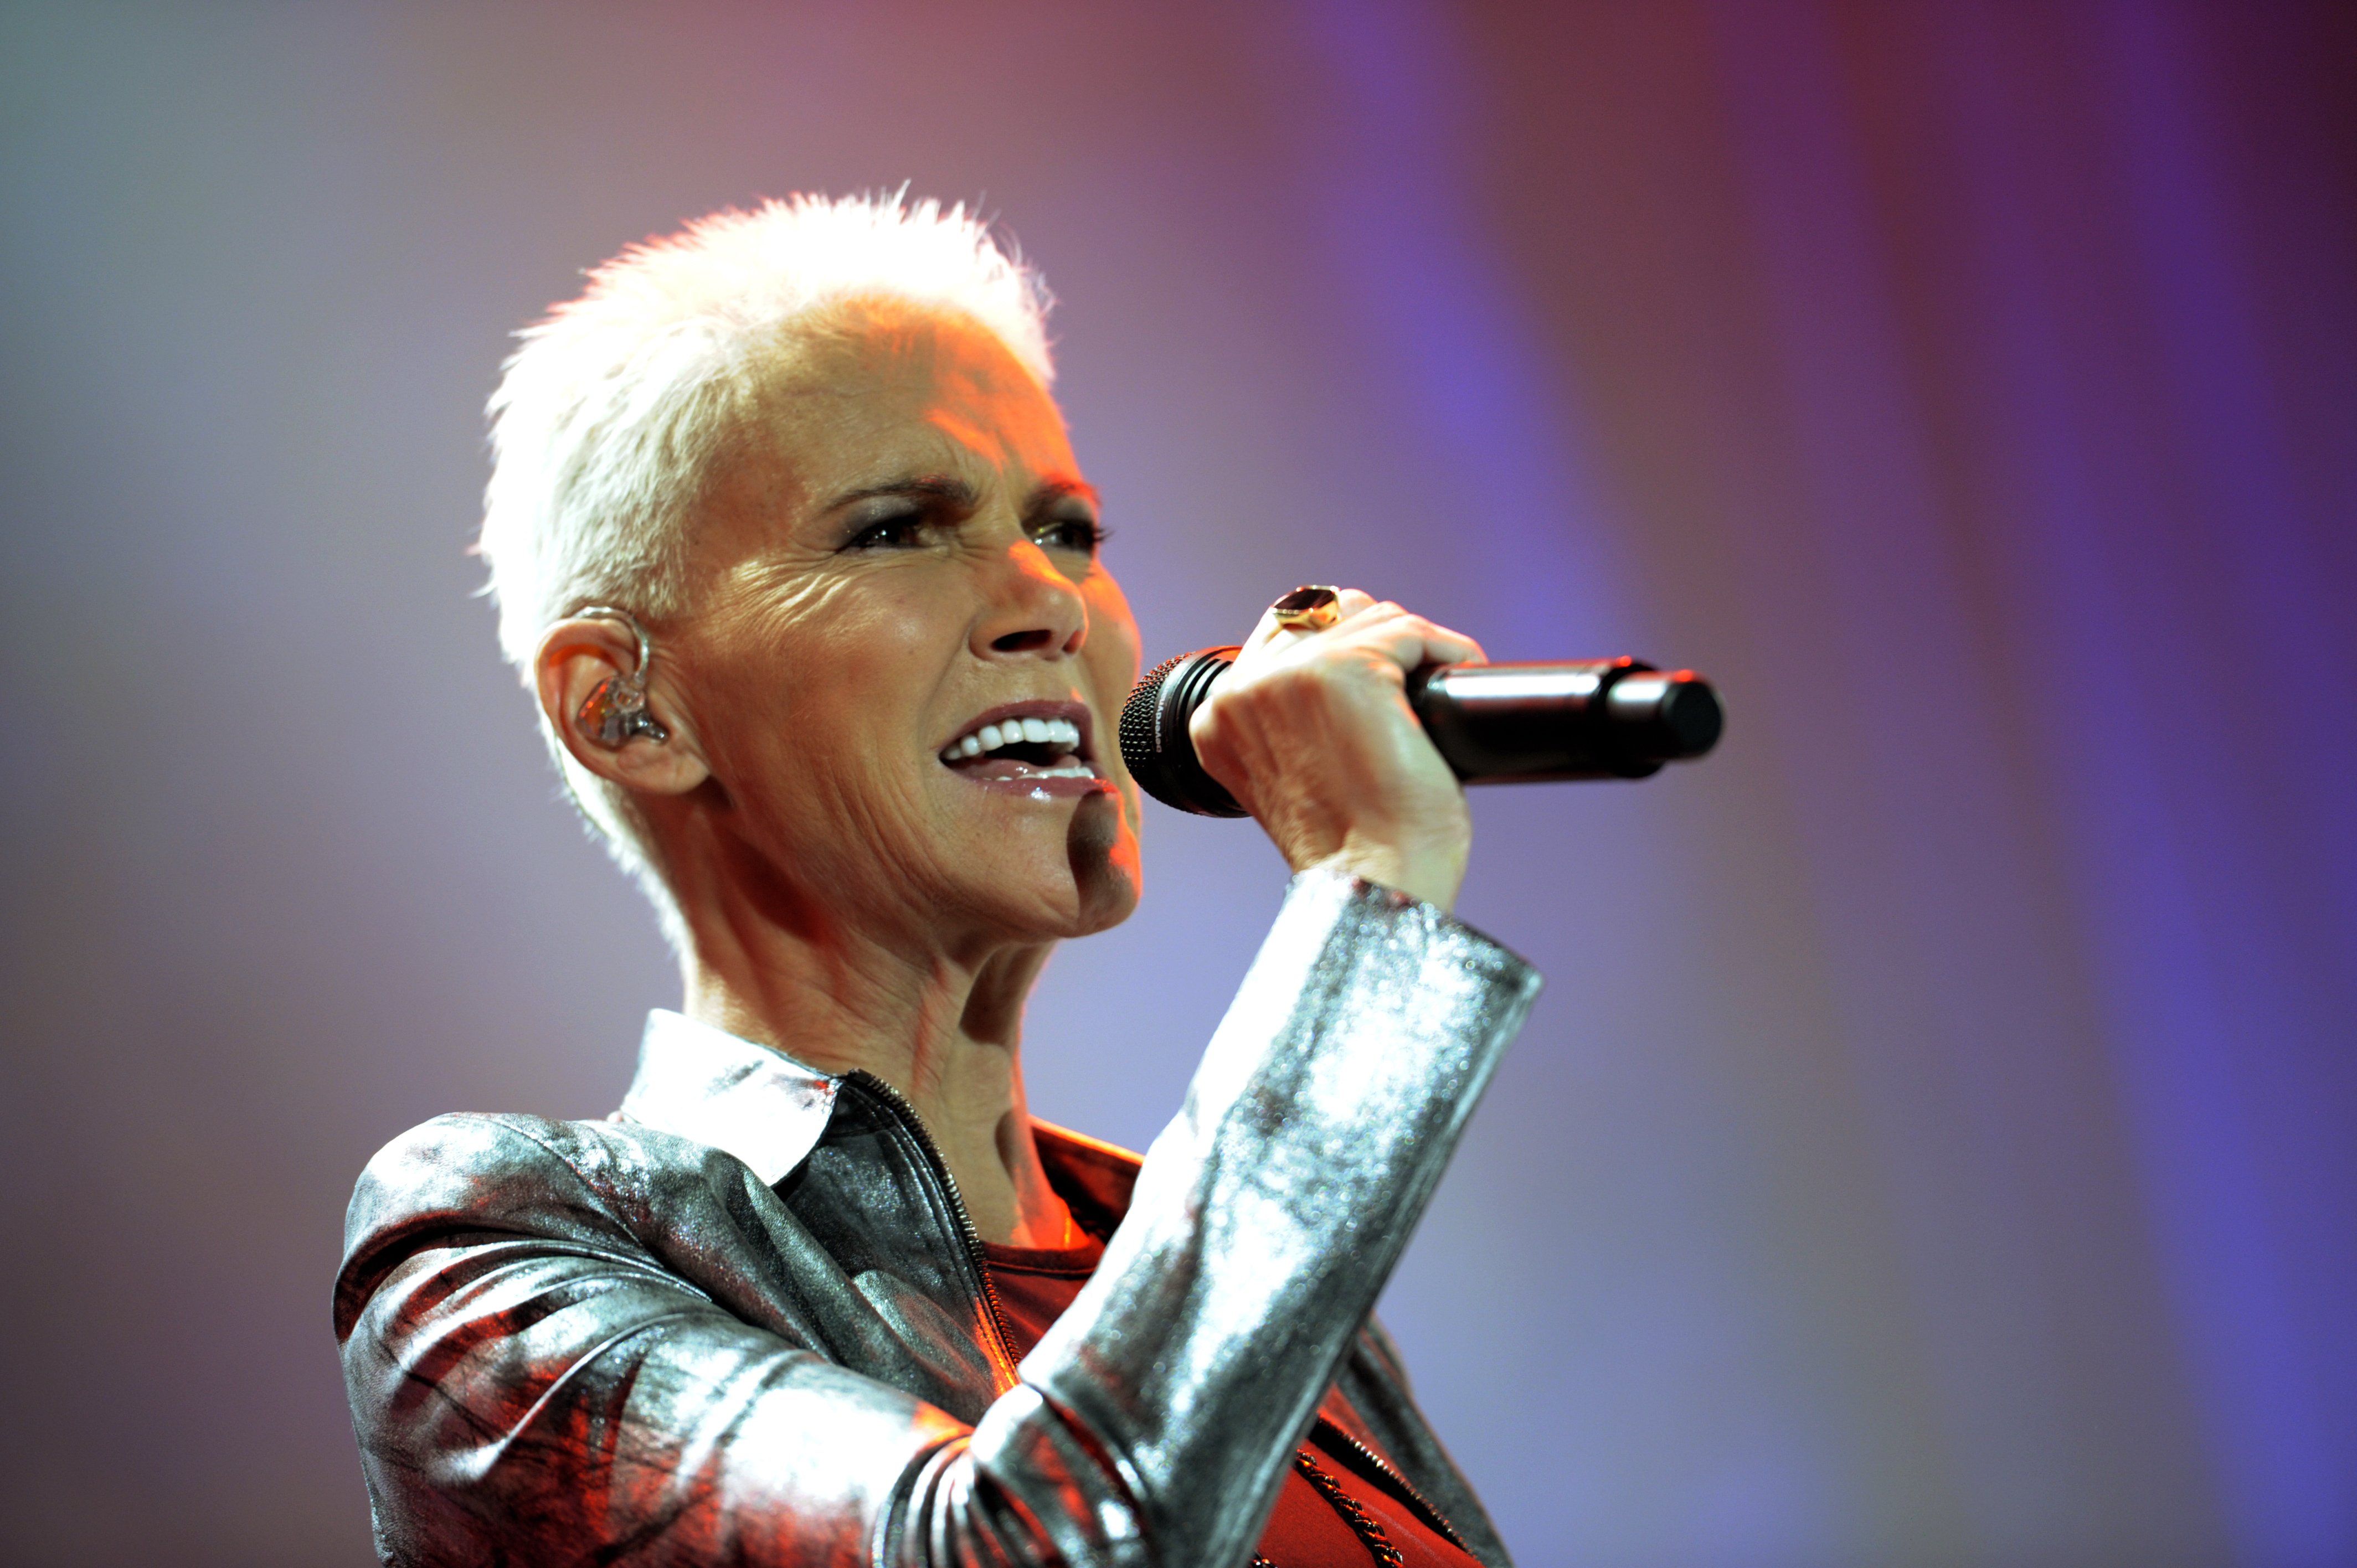  Marie Fredriksson of Roxette performs on stage at the Koenig-Pilsener-Arena on October 19, 2011 | Photo: GettyImages